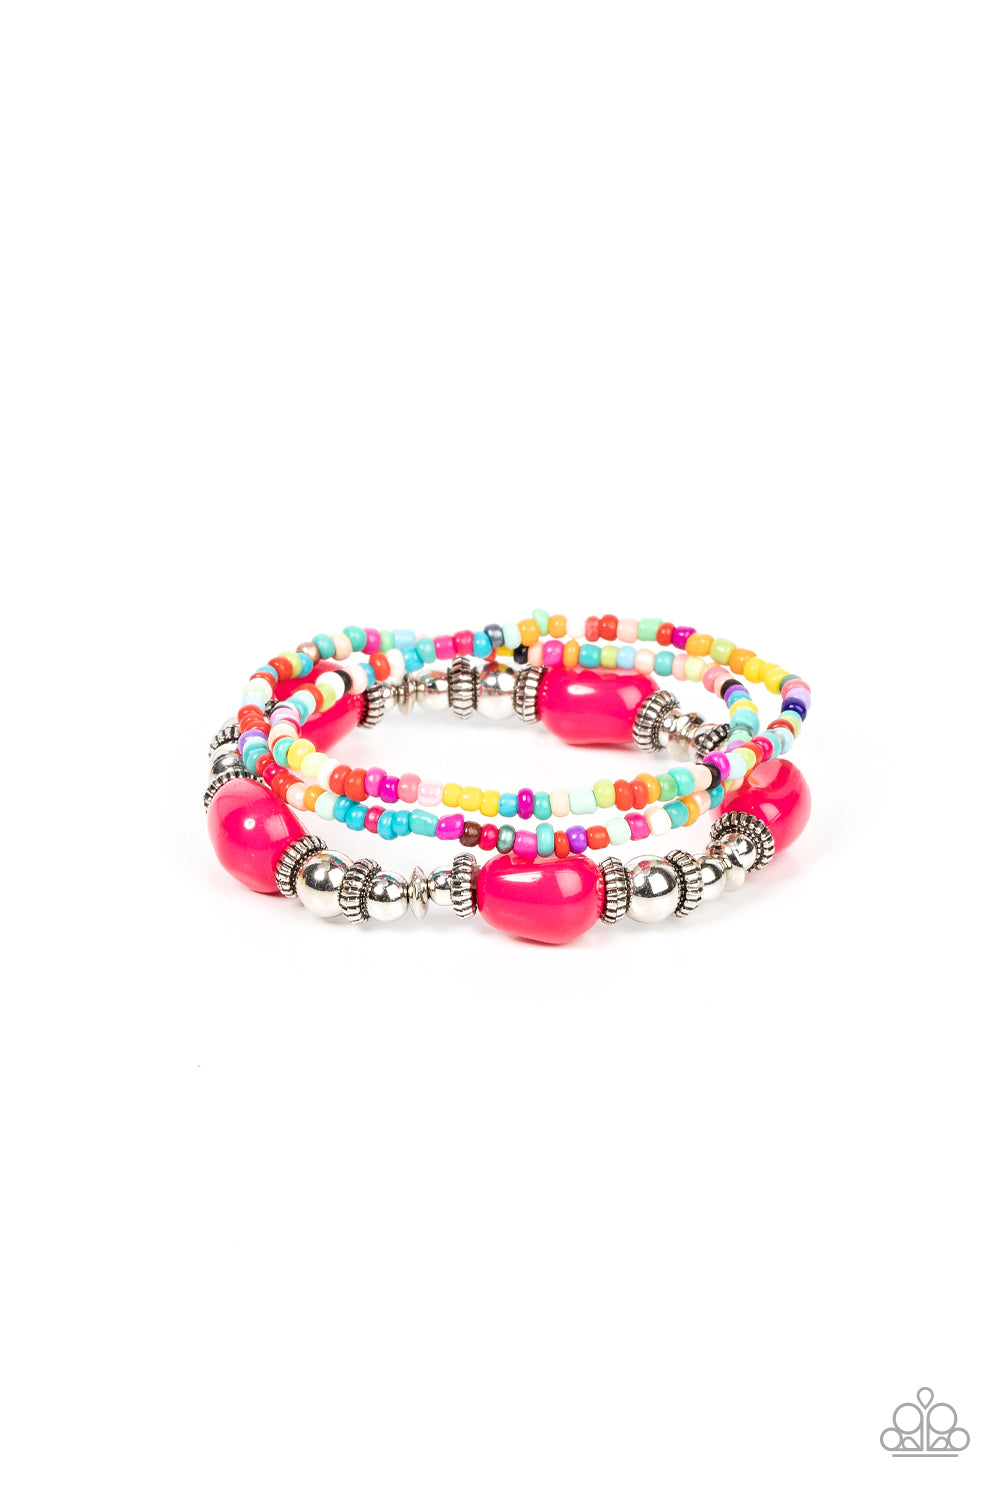 Paparazzi Confidently Crafty - Pink Stretchy Bracelet. #P9WH-PKXX-291X. Subscribe & Save!